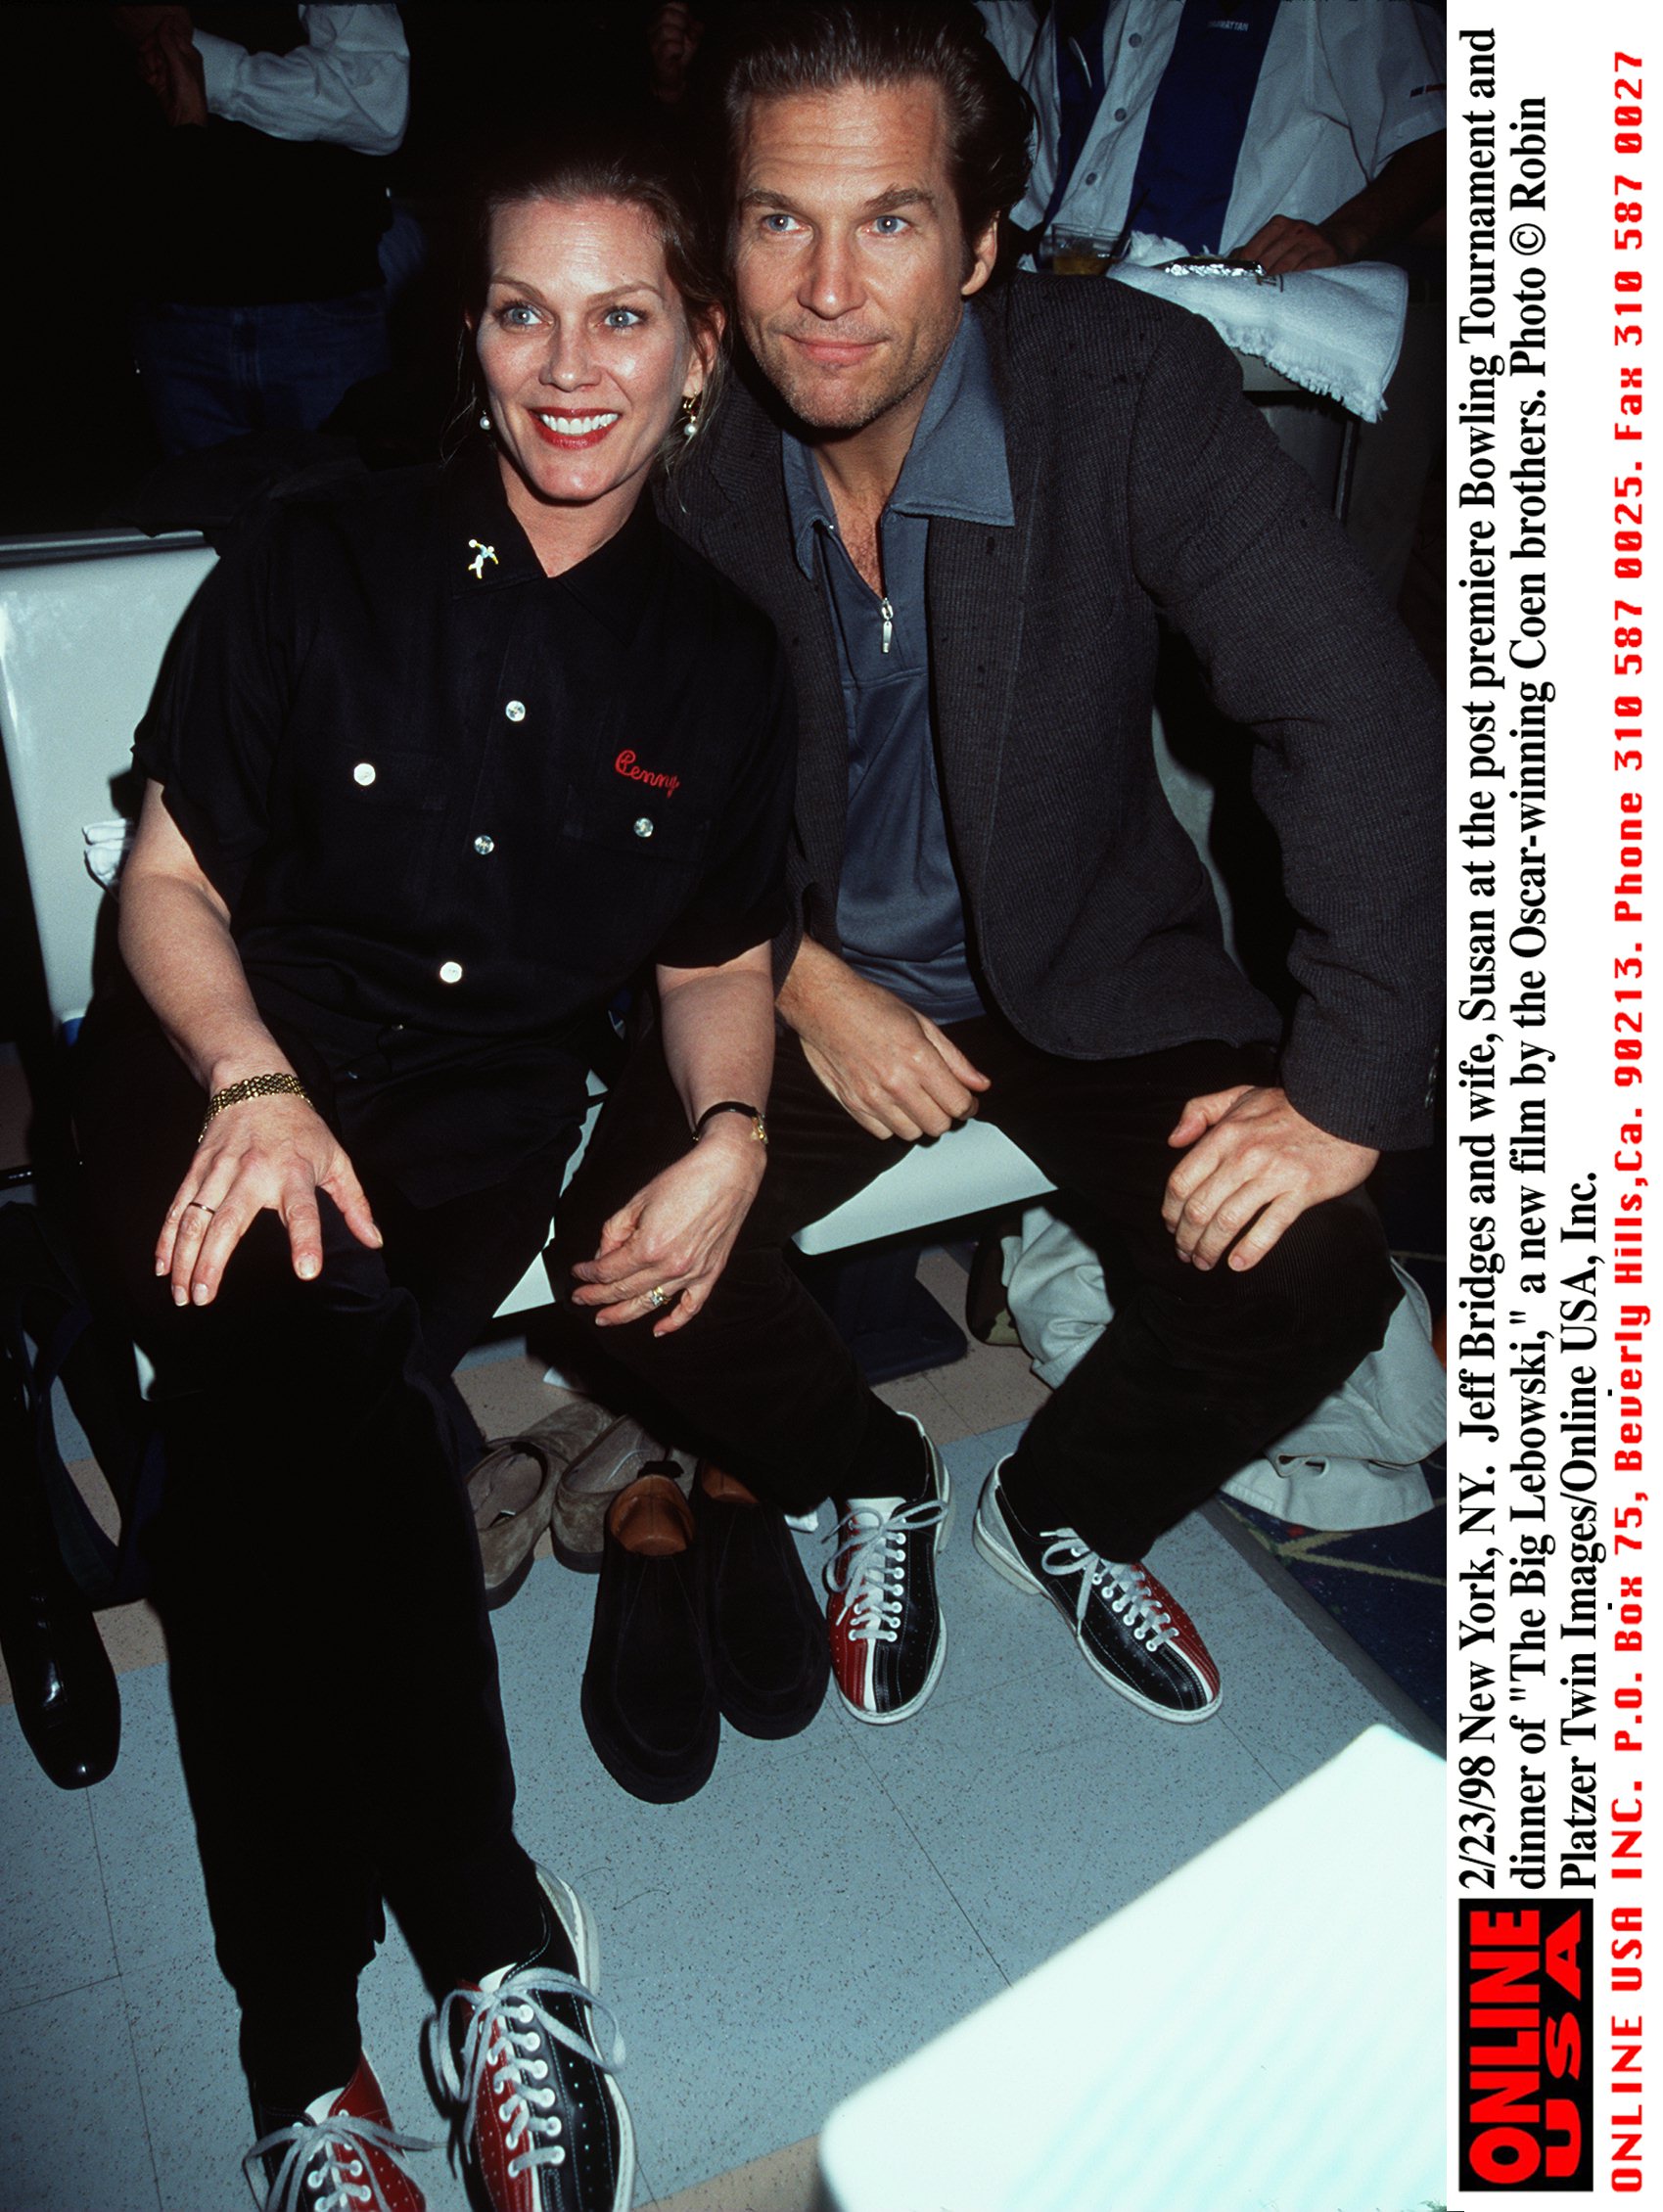 Susan and Jeff Bridges at the post premiere Bowling Tournament and dinner for "The Big Lebowski," on February 23, 1998, in New York | Source: Getty Images